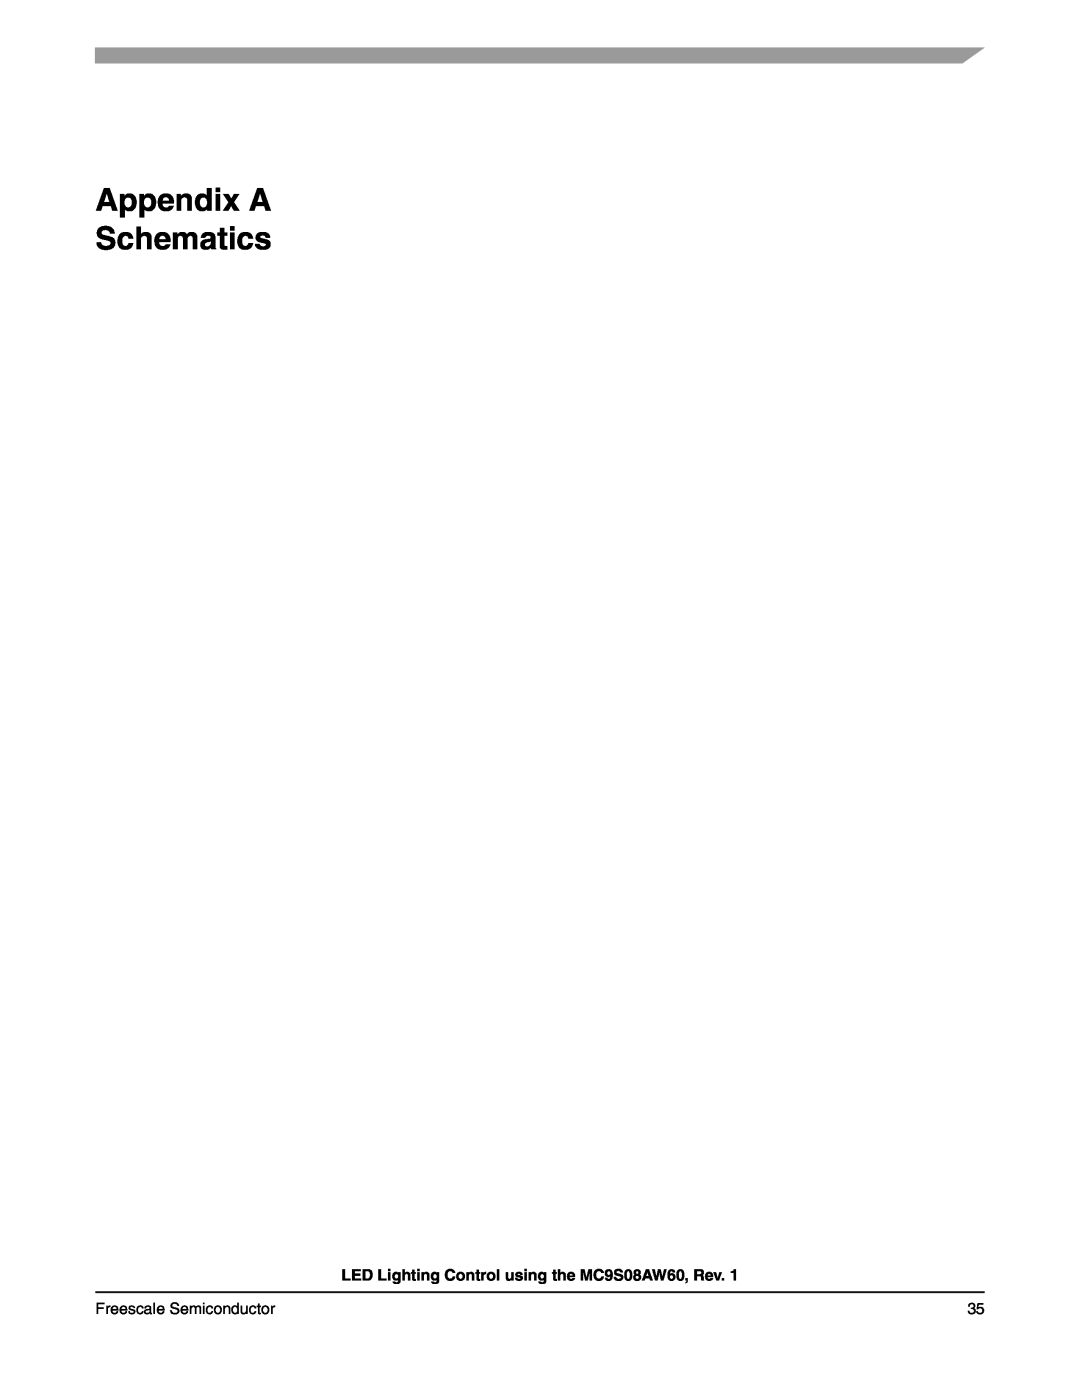 Freescale Semiconductor manual Appendix A Schematics, LED Lighting Control using the MC9S08AW60, Rev 